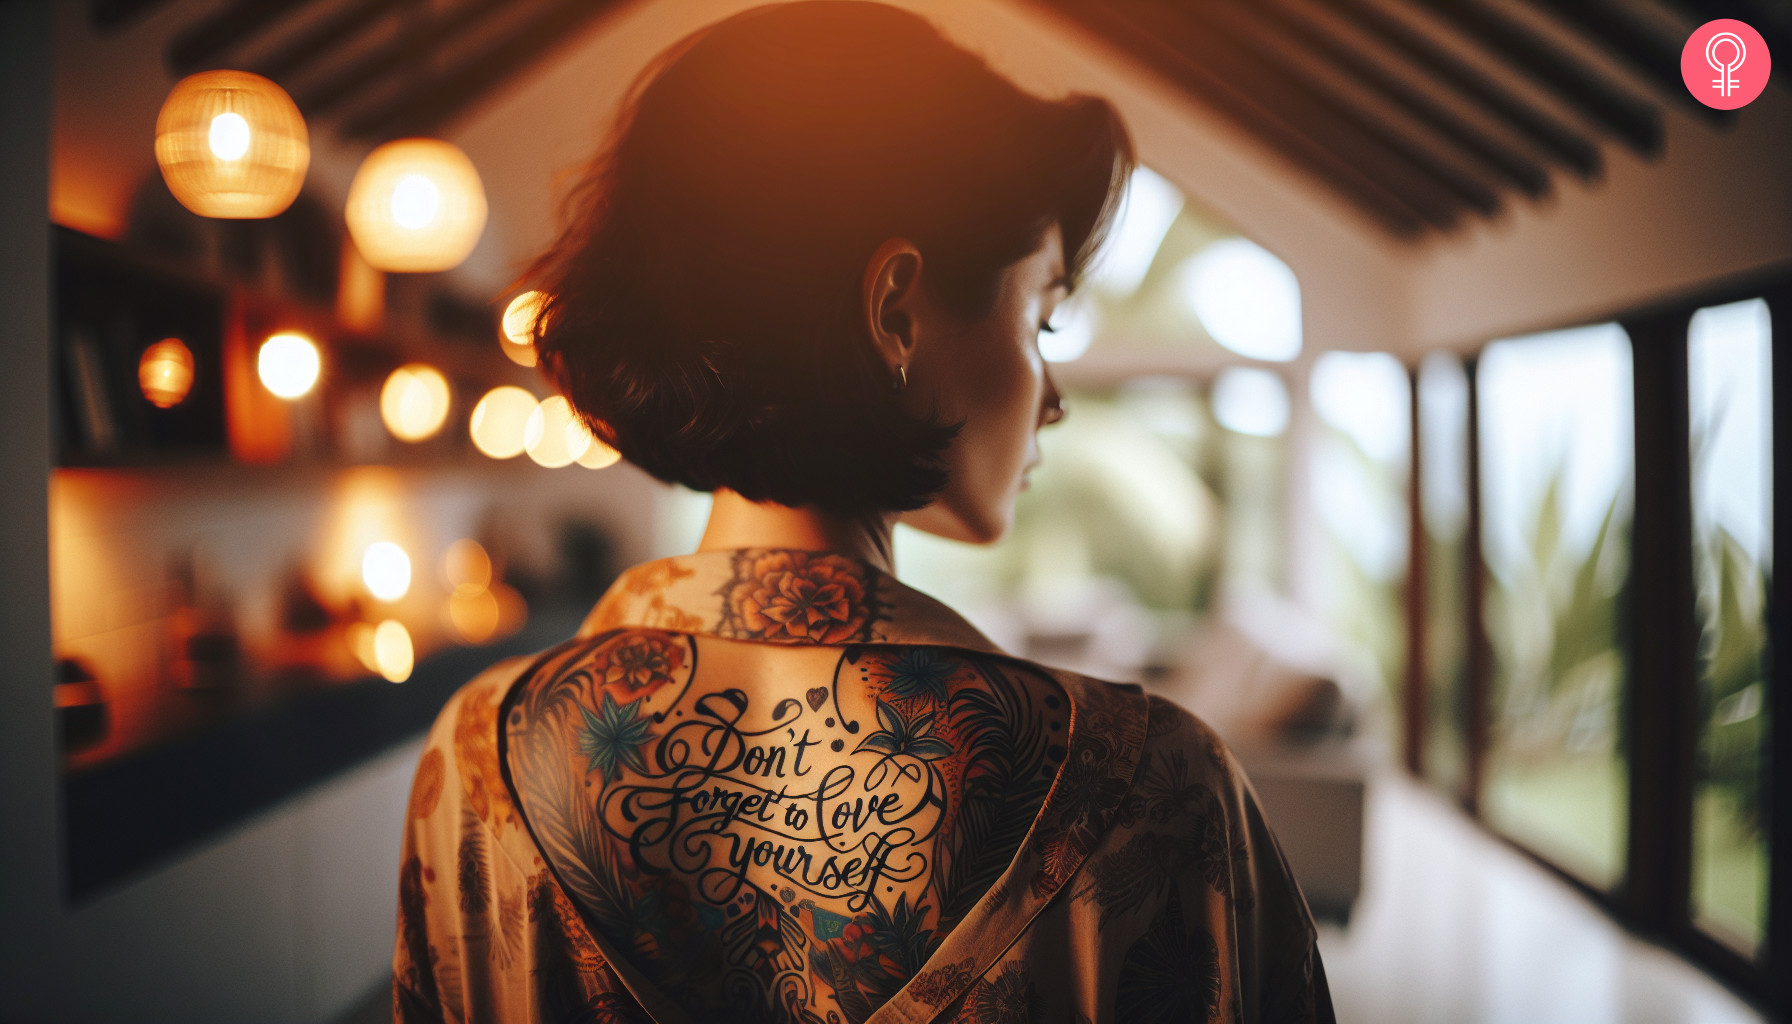 A woman showing a self-love tattoo on her back